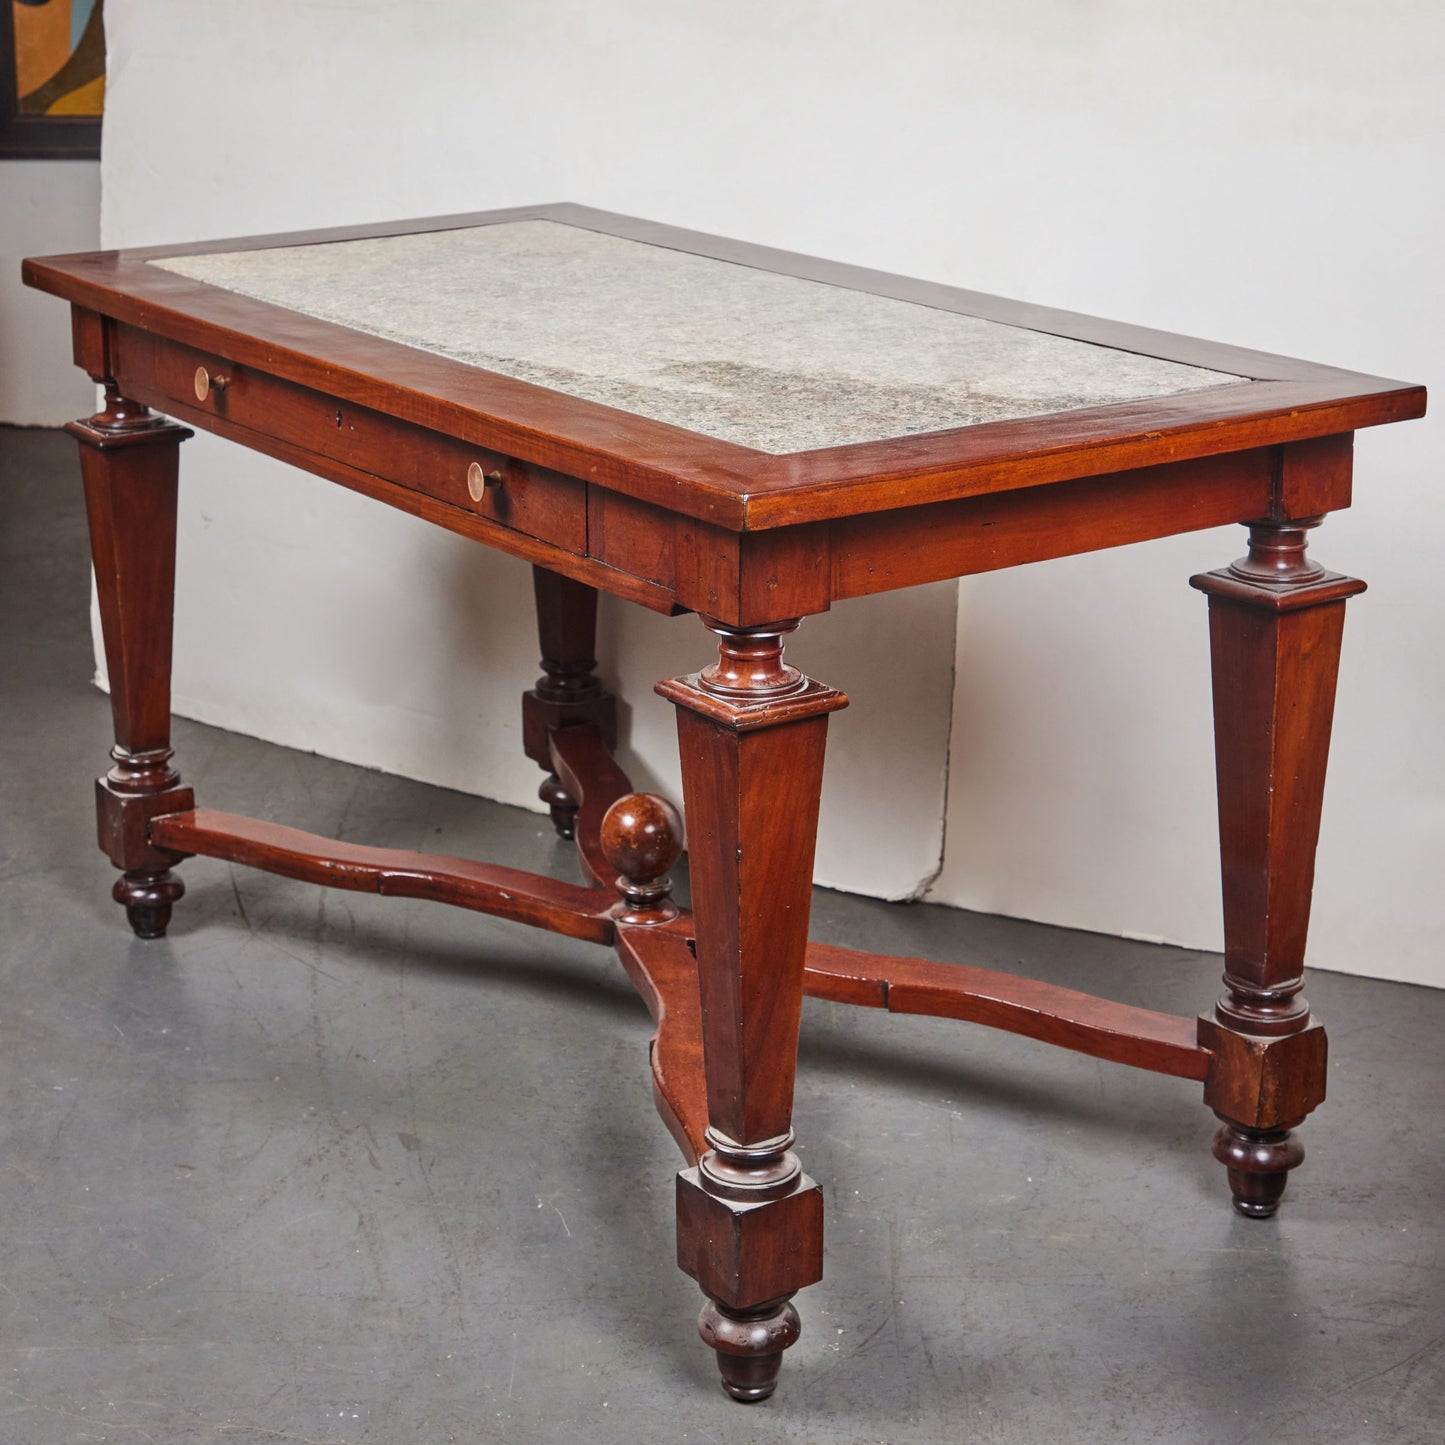 c. 1780 Tuscan Console Table